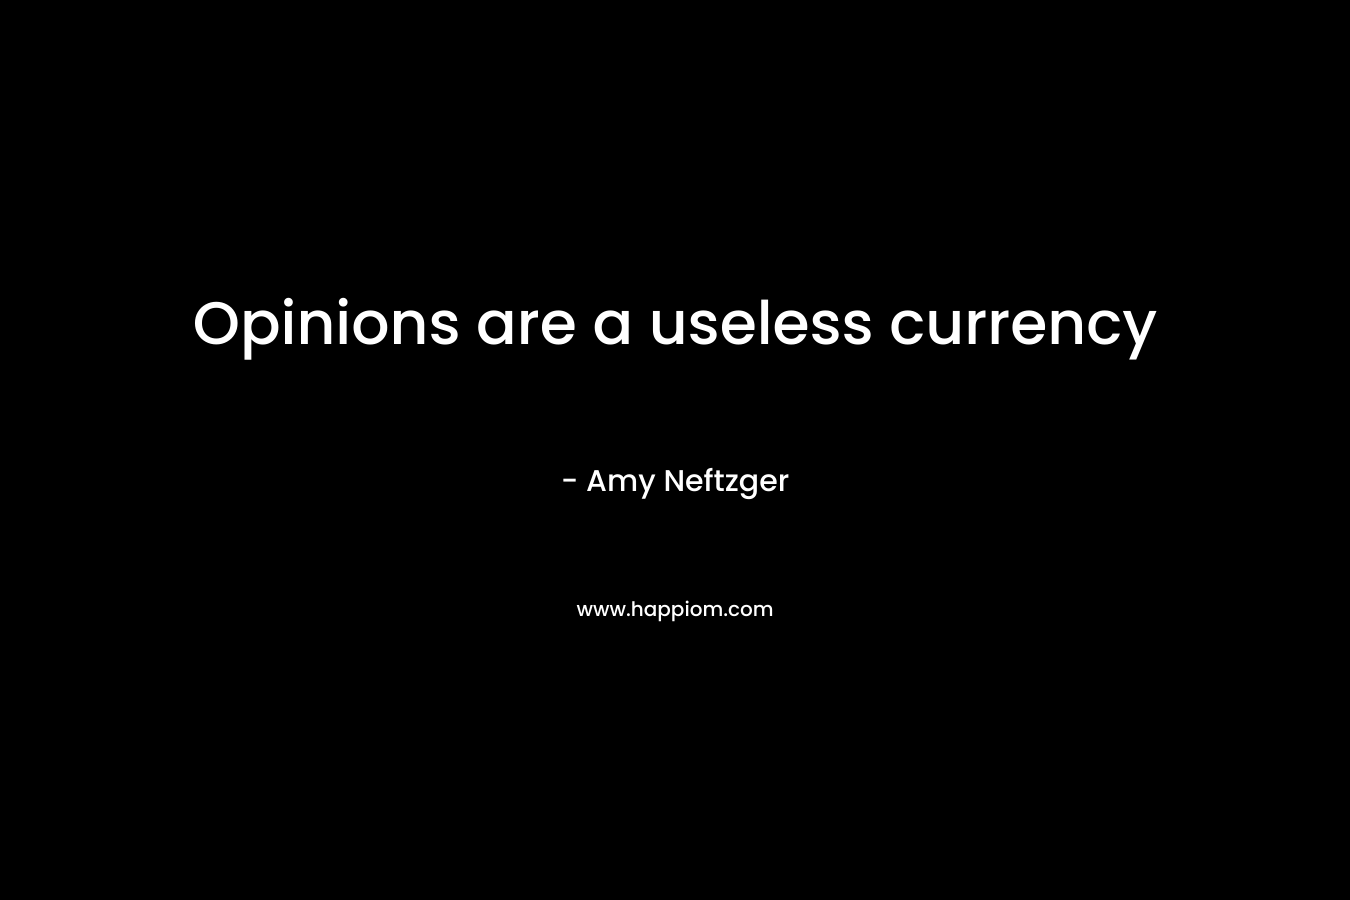 Opinions are a useless currency